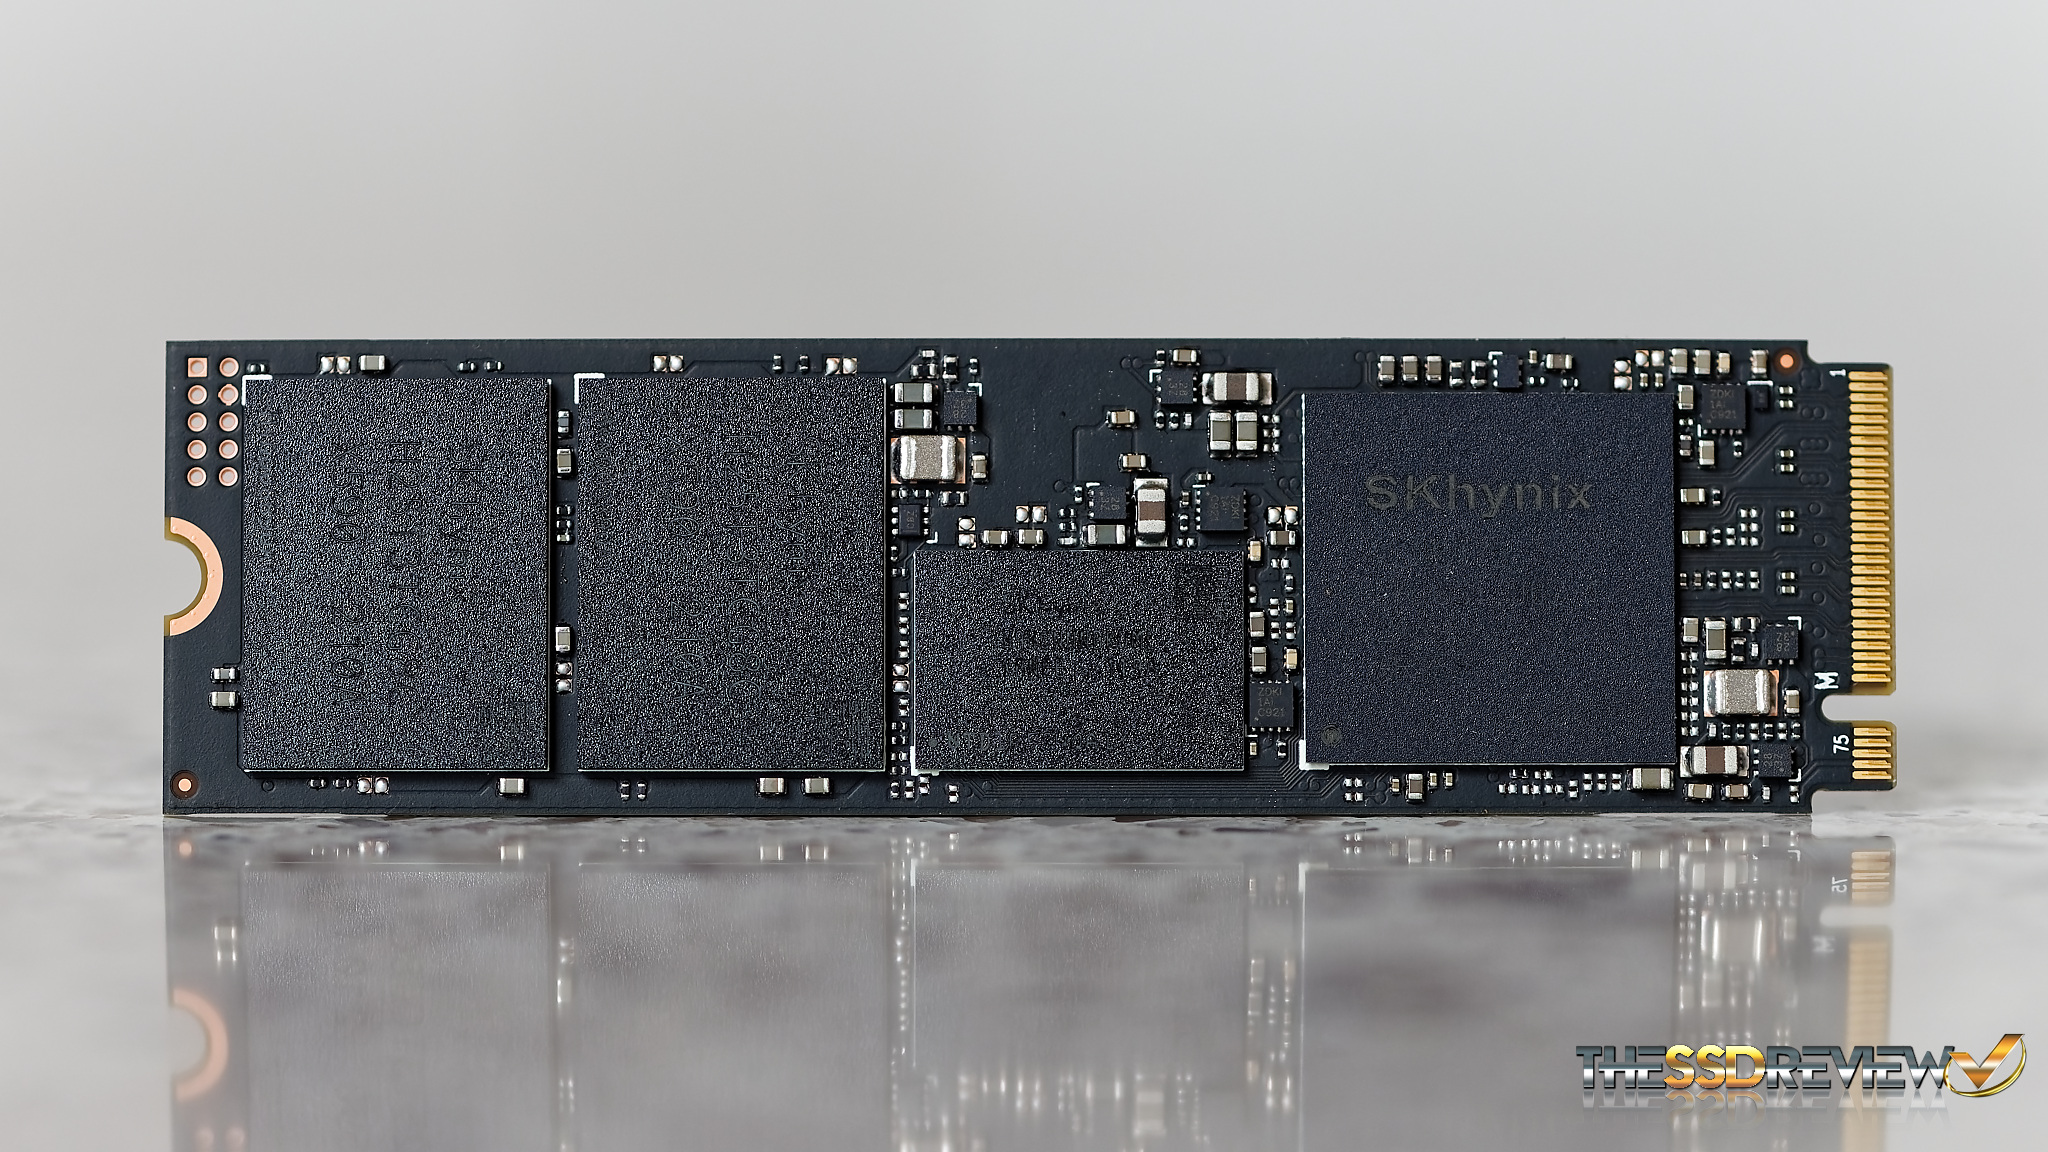 SK hynix Platinum P41 SSD Review - Can Gen4 Get Any Better than